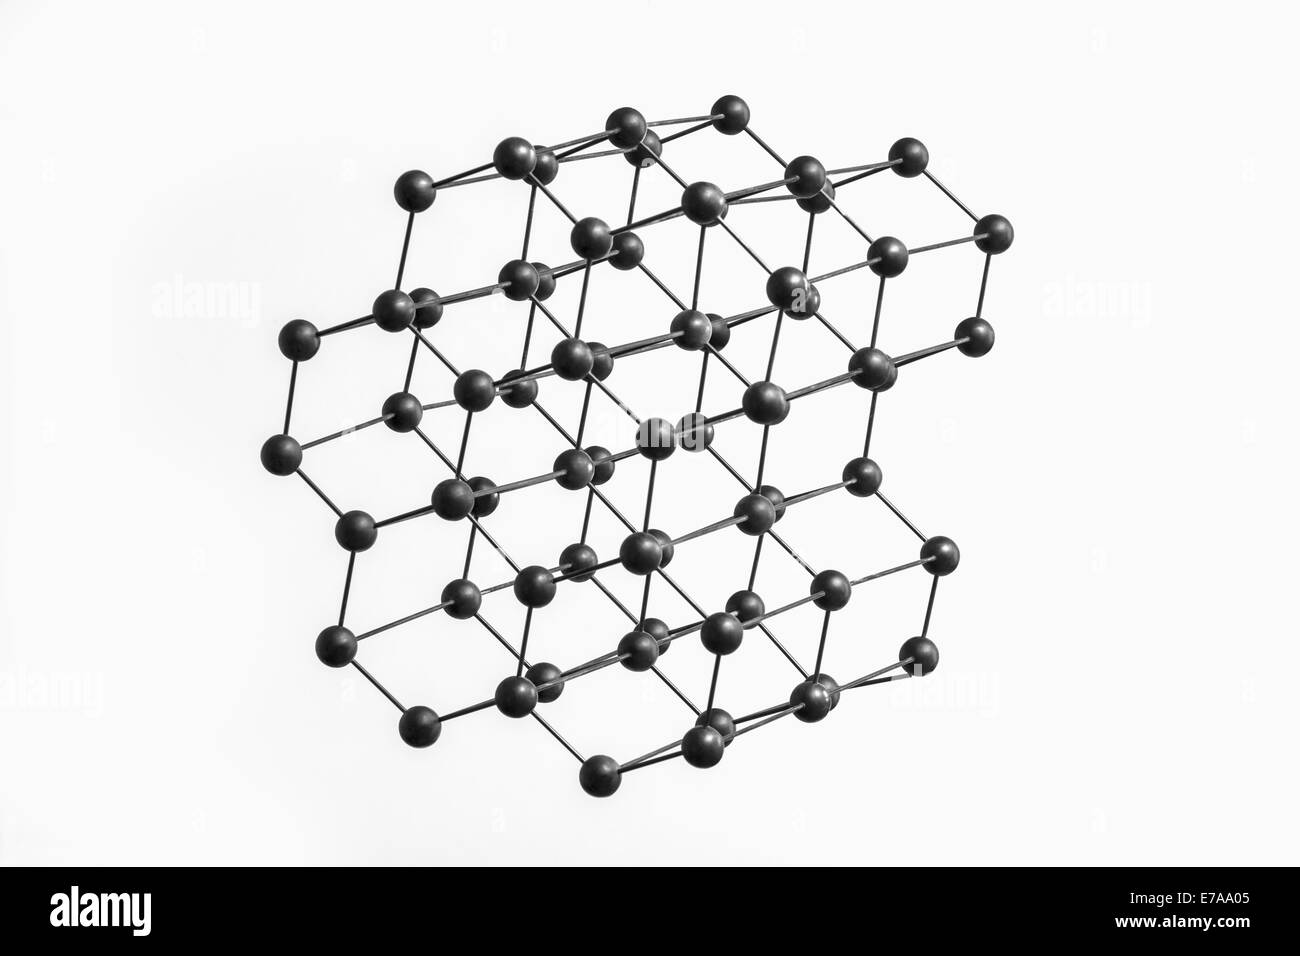 Black molecular structure over white background Stock Photo